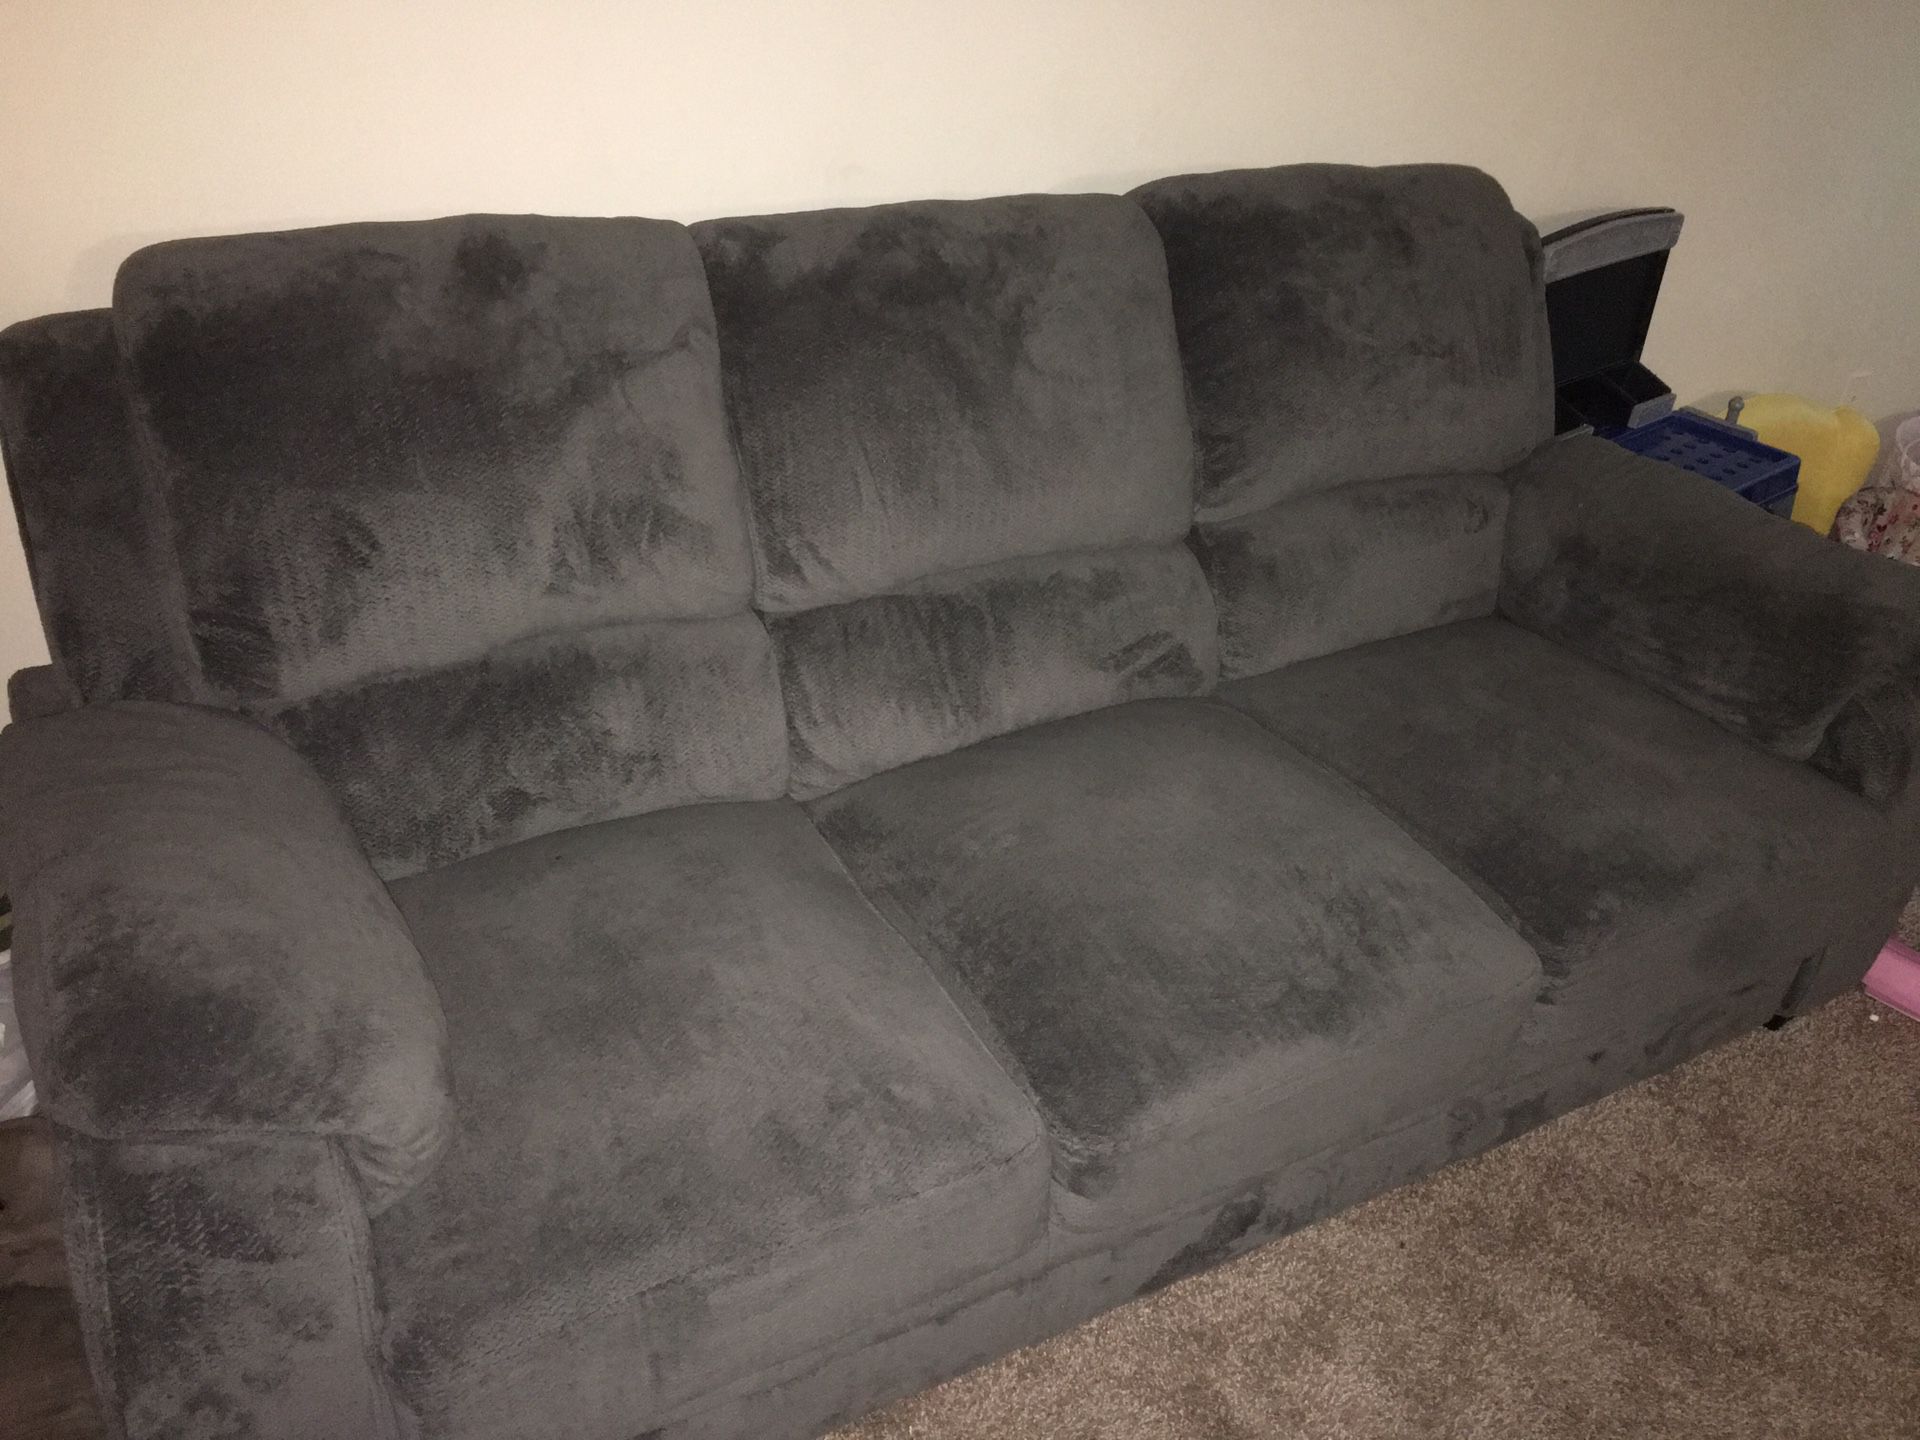 Grey Suede Sofa. Moving and need to sell ASAP